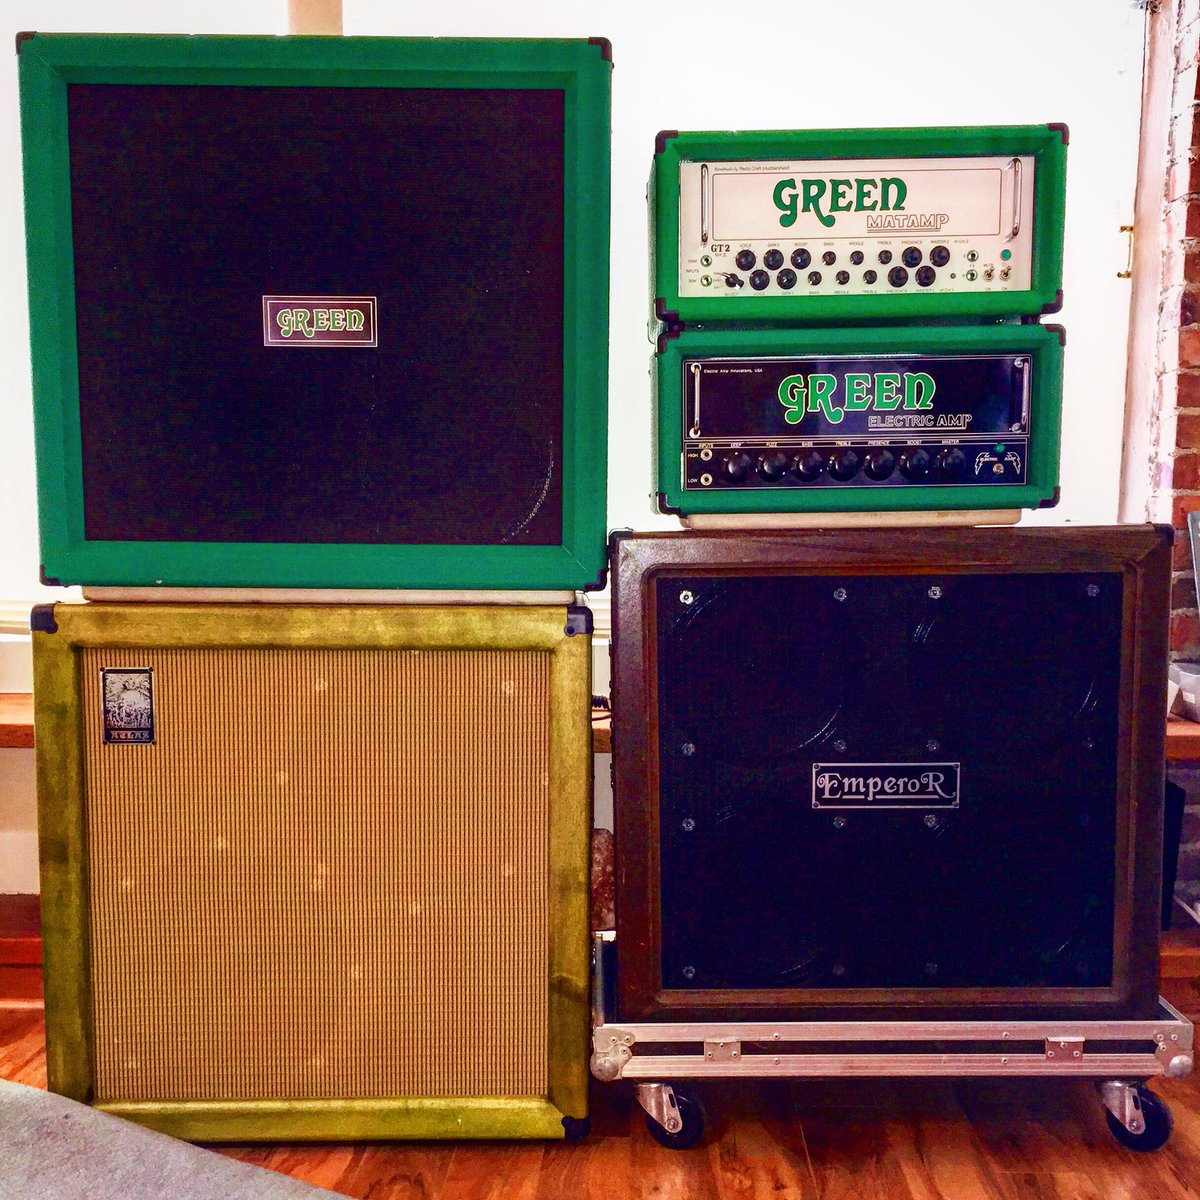 Here’s what’s happening at the Beldam bunker. #greenamp #atlascabs #emperorcabs #doommetal #loudashell